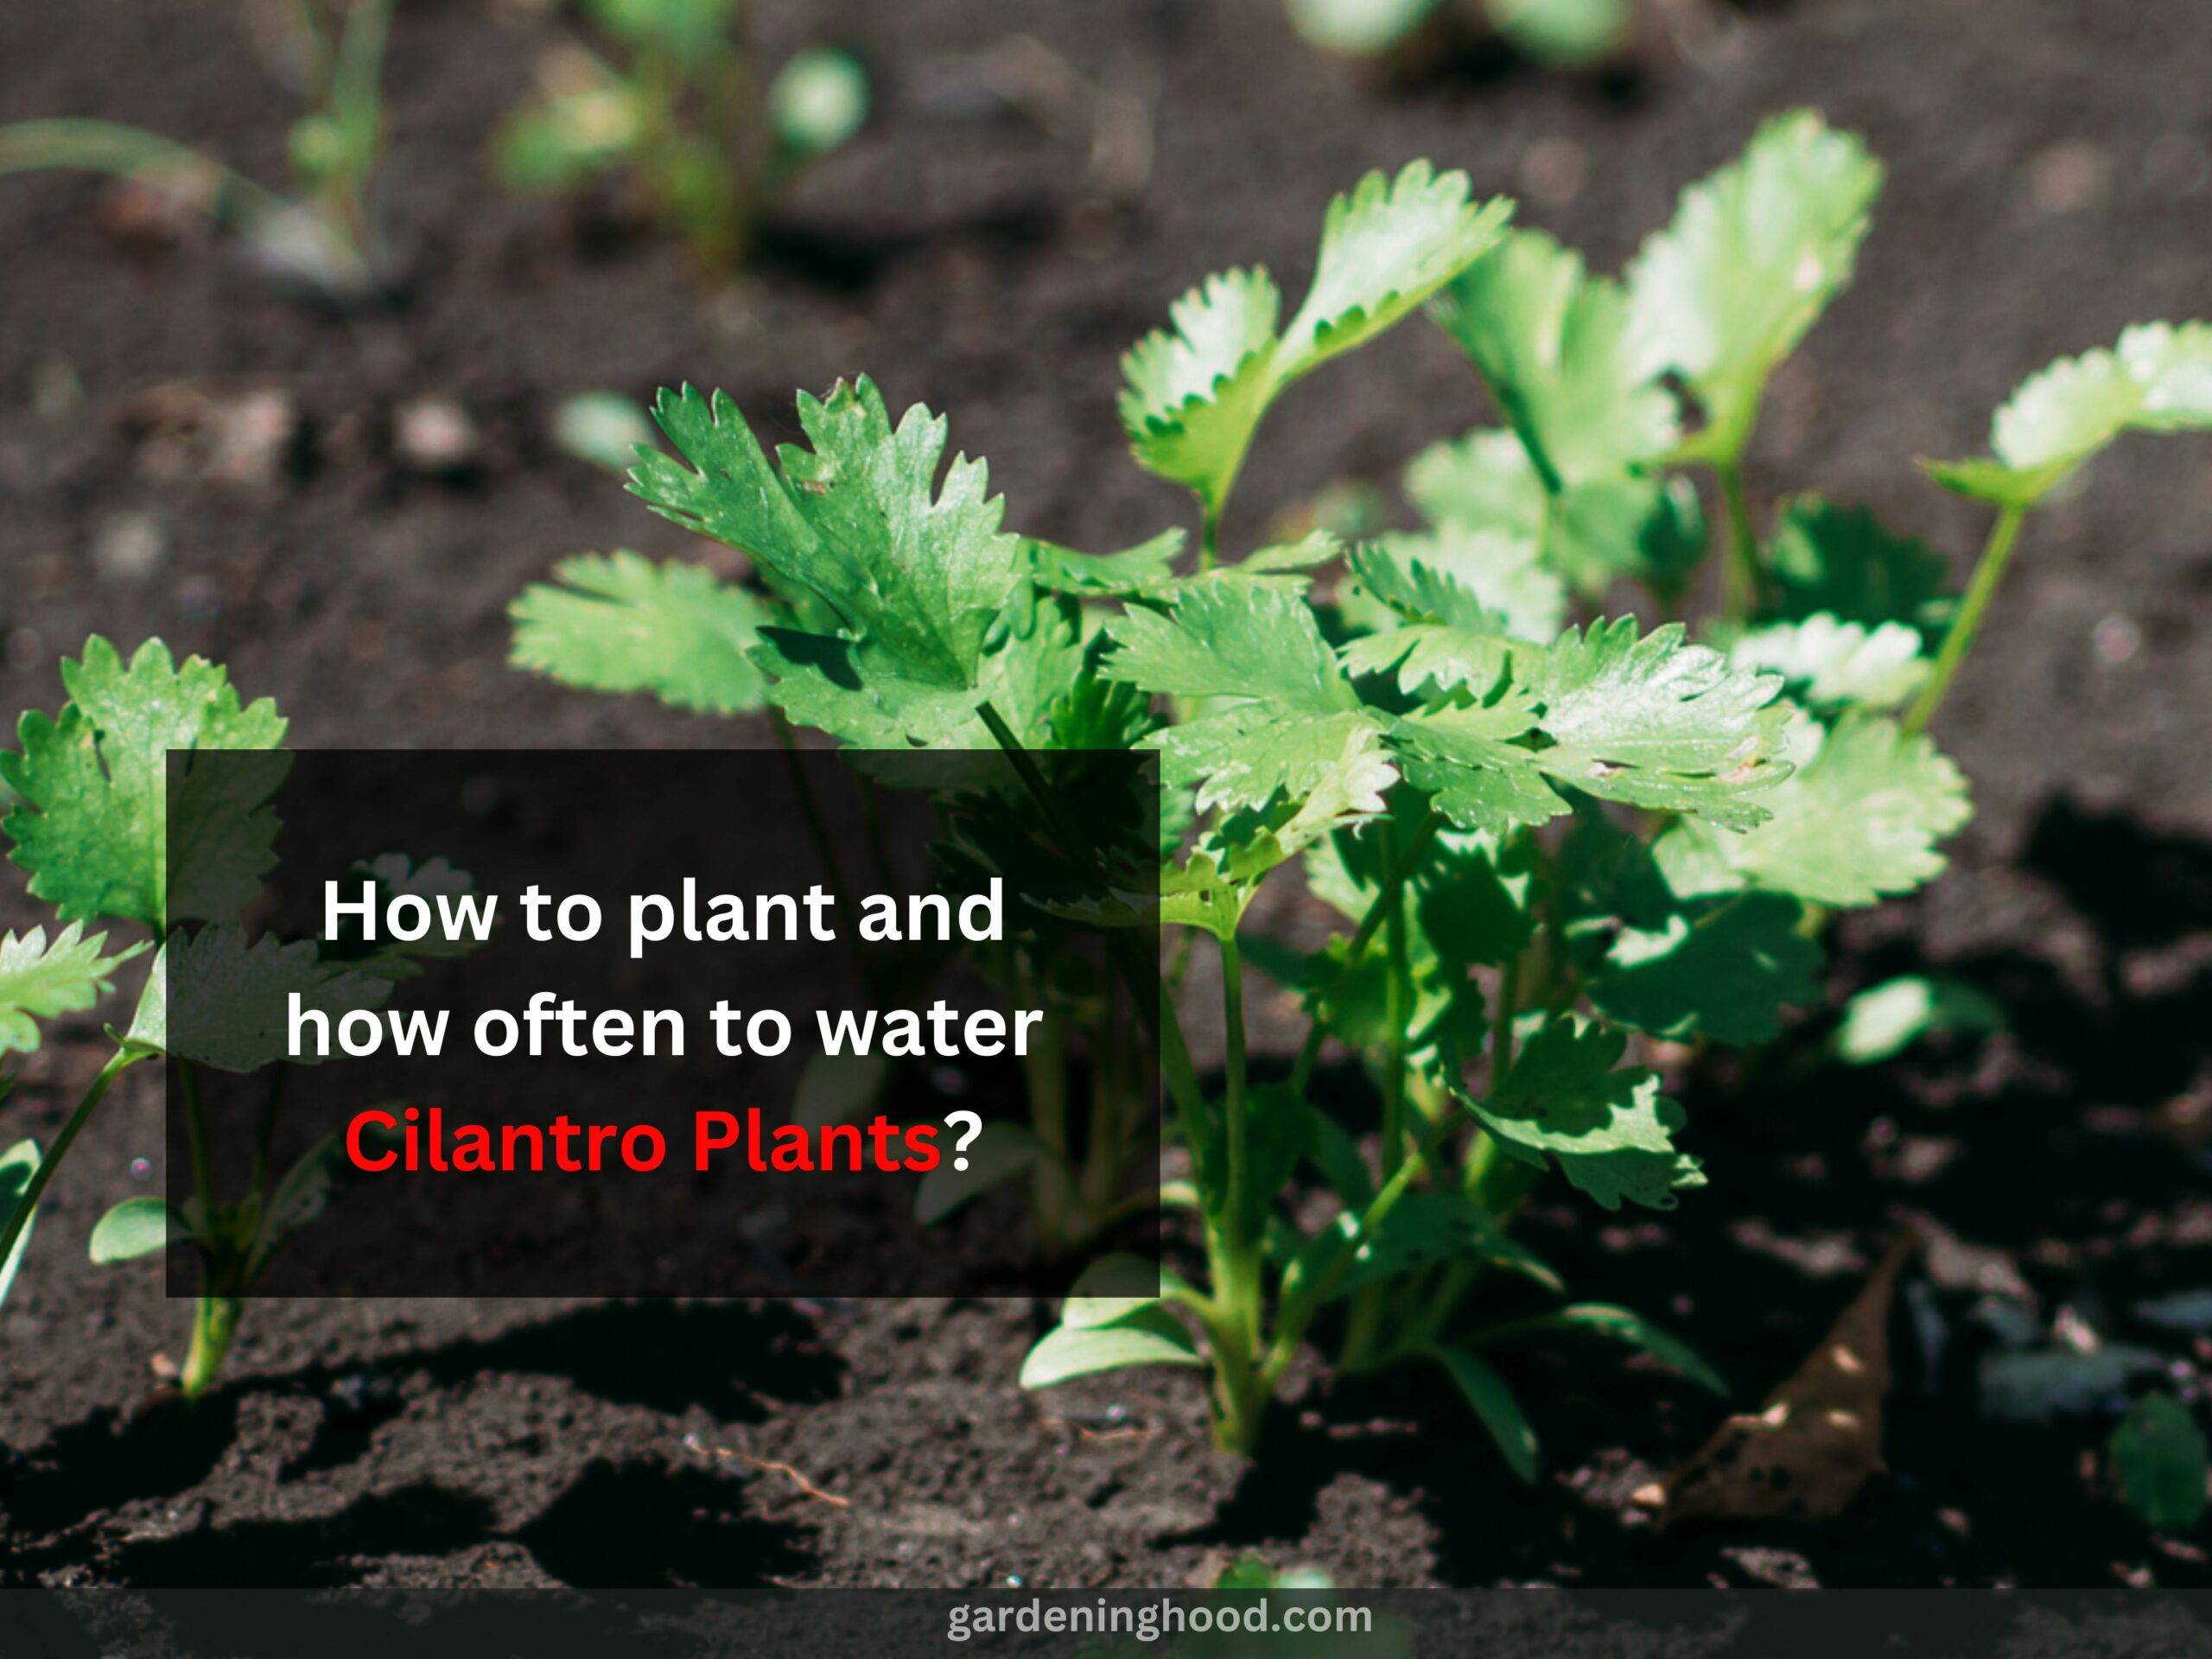 How to plant and how often to water Cilantro Plants?